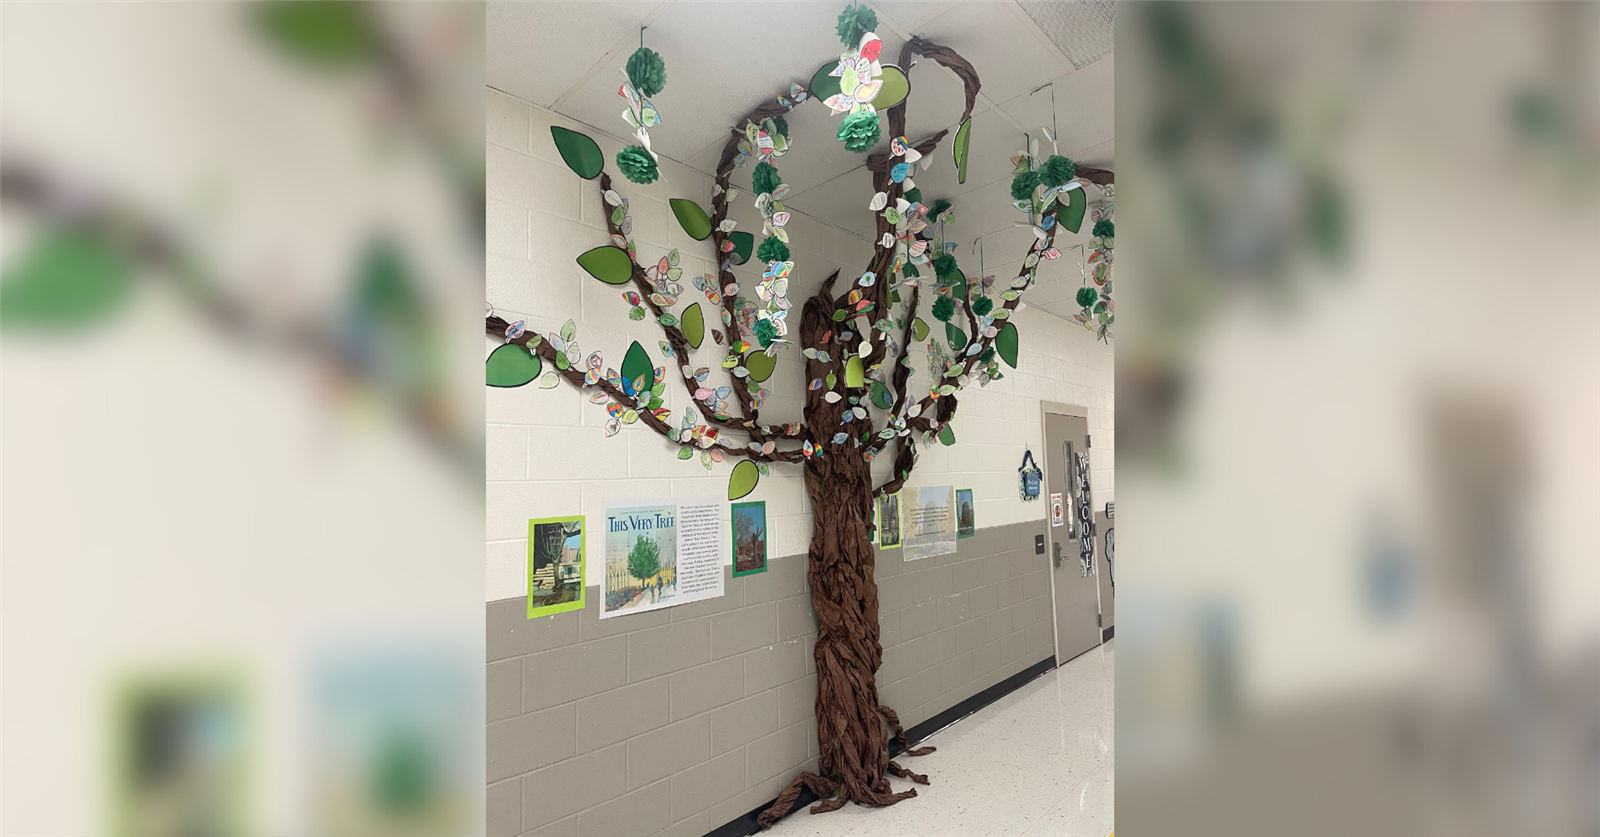 A paper machete tree looms large outside the Donelson Elementary library to showcase lessons in resiliency.